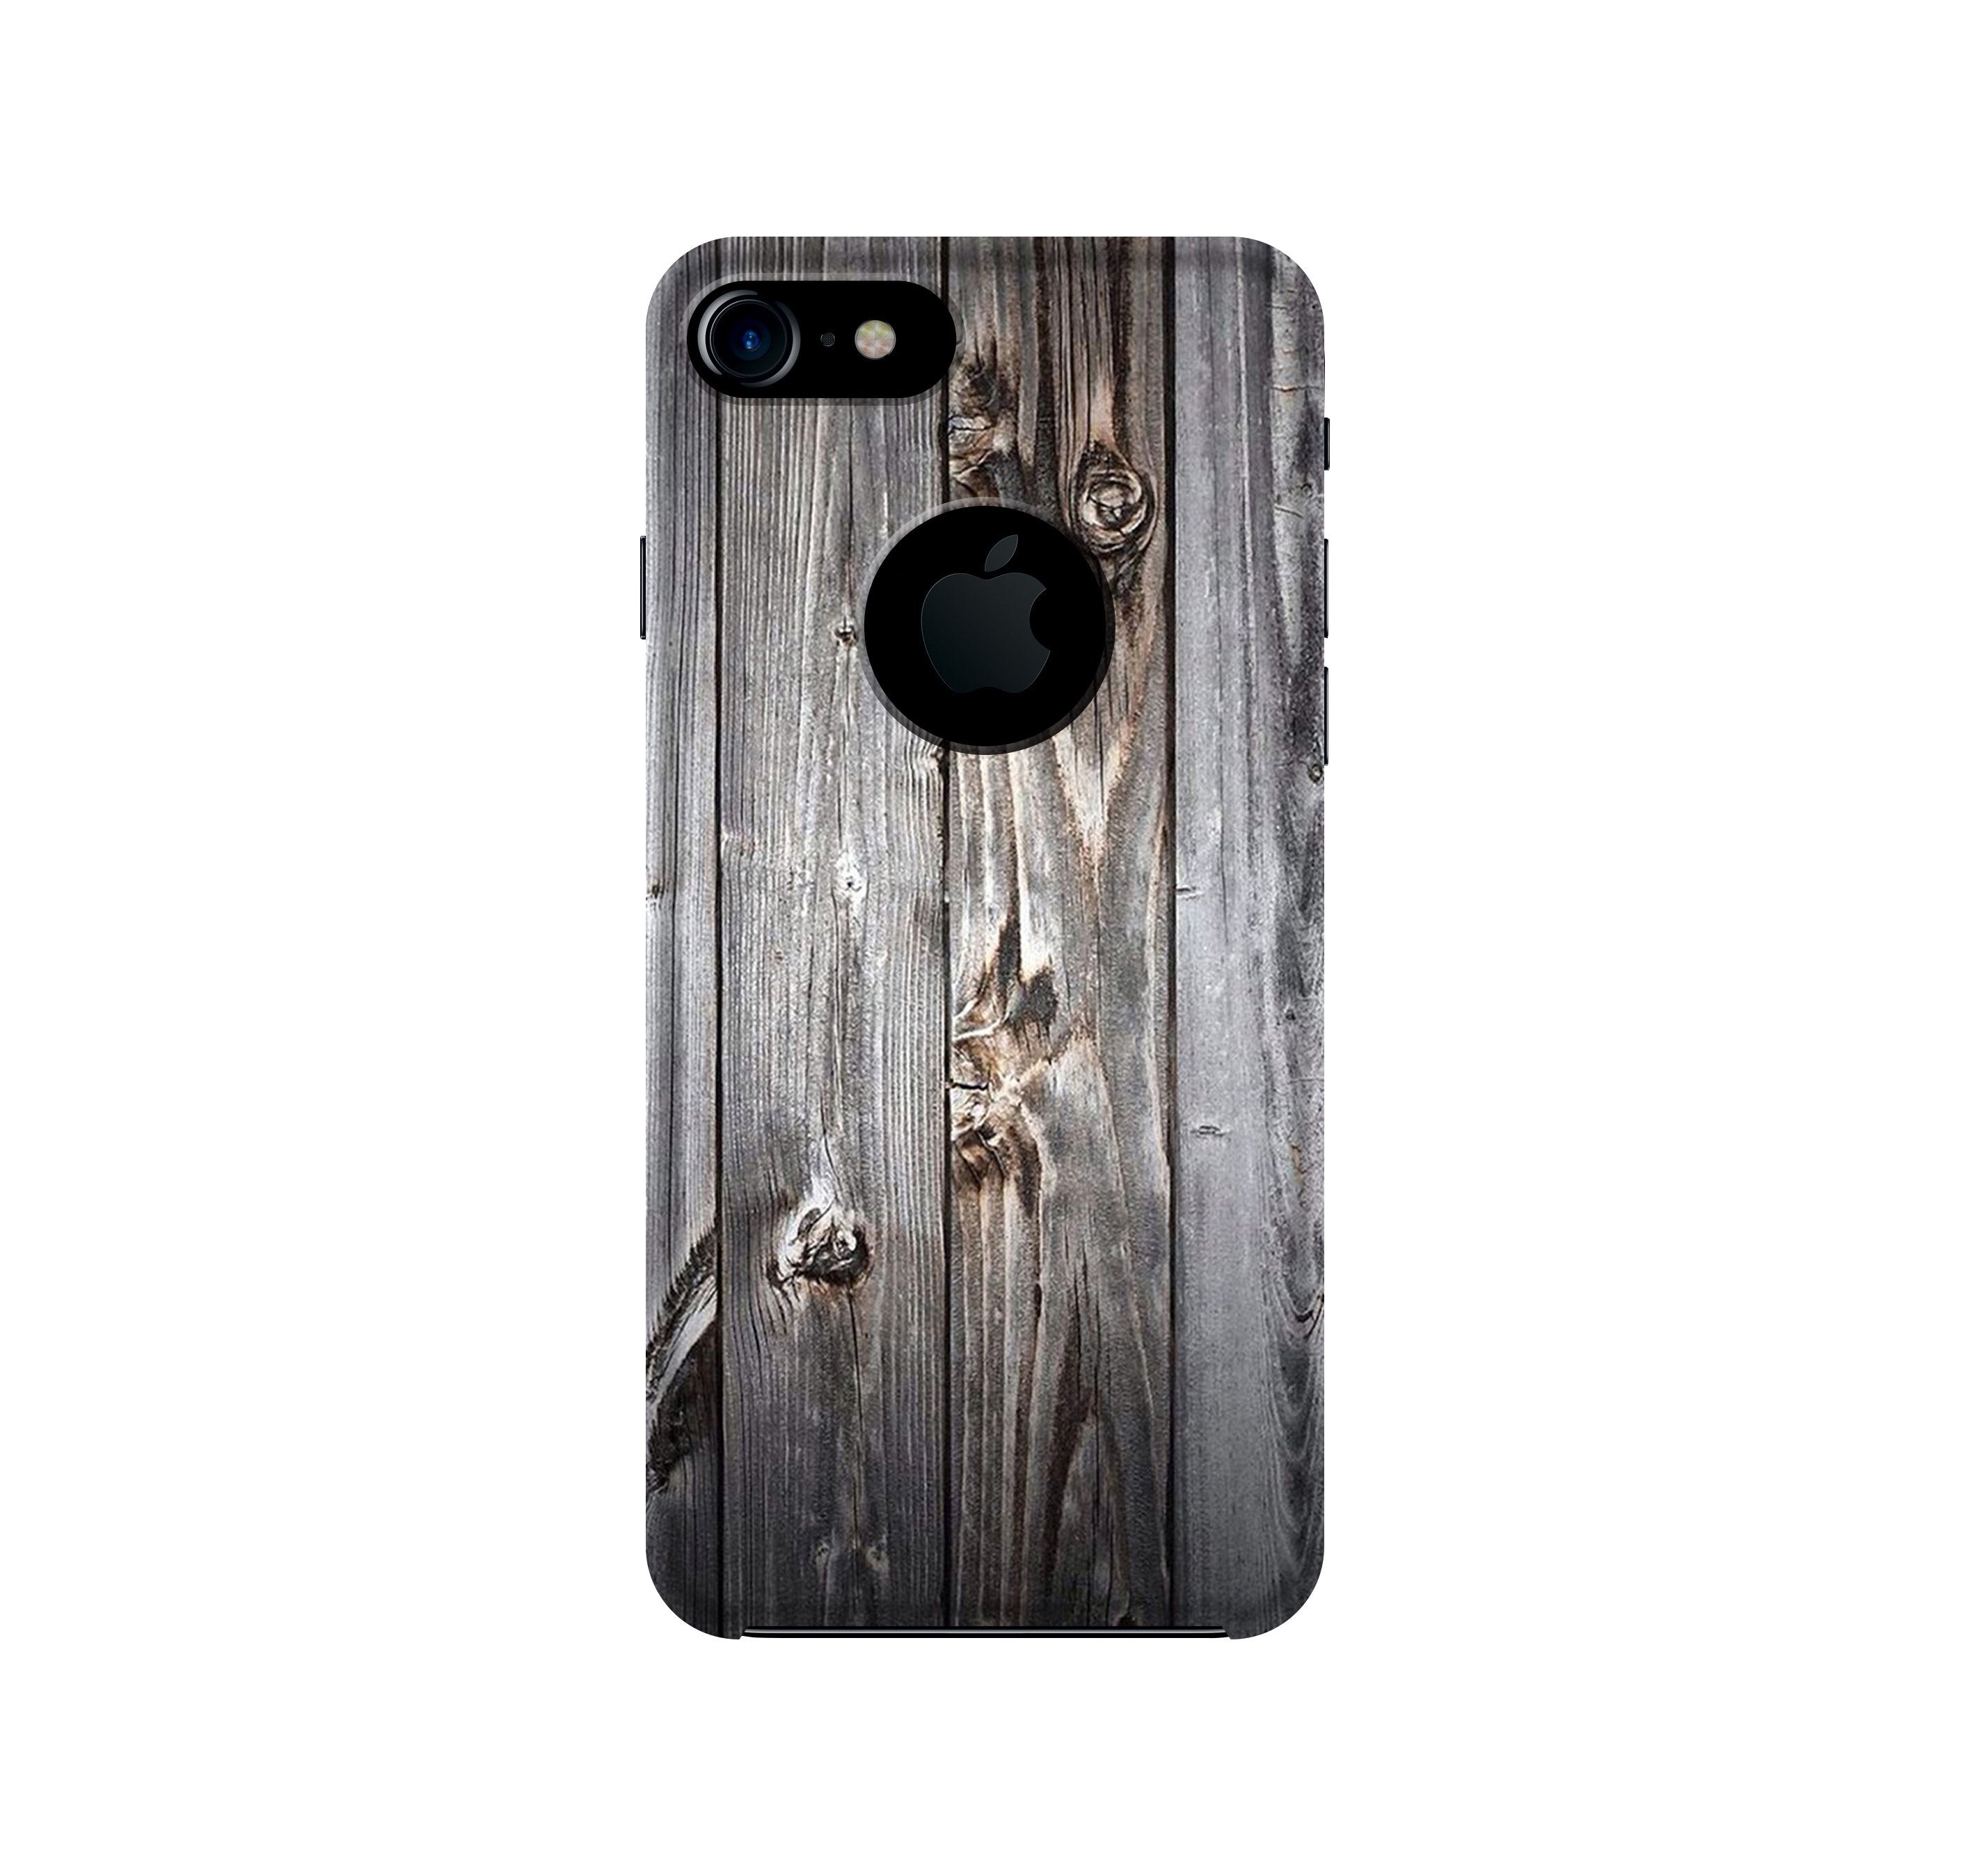 Wooden Look Case for iPhone 7 logo cut  (Design - 114)